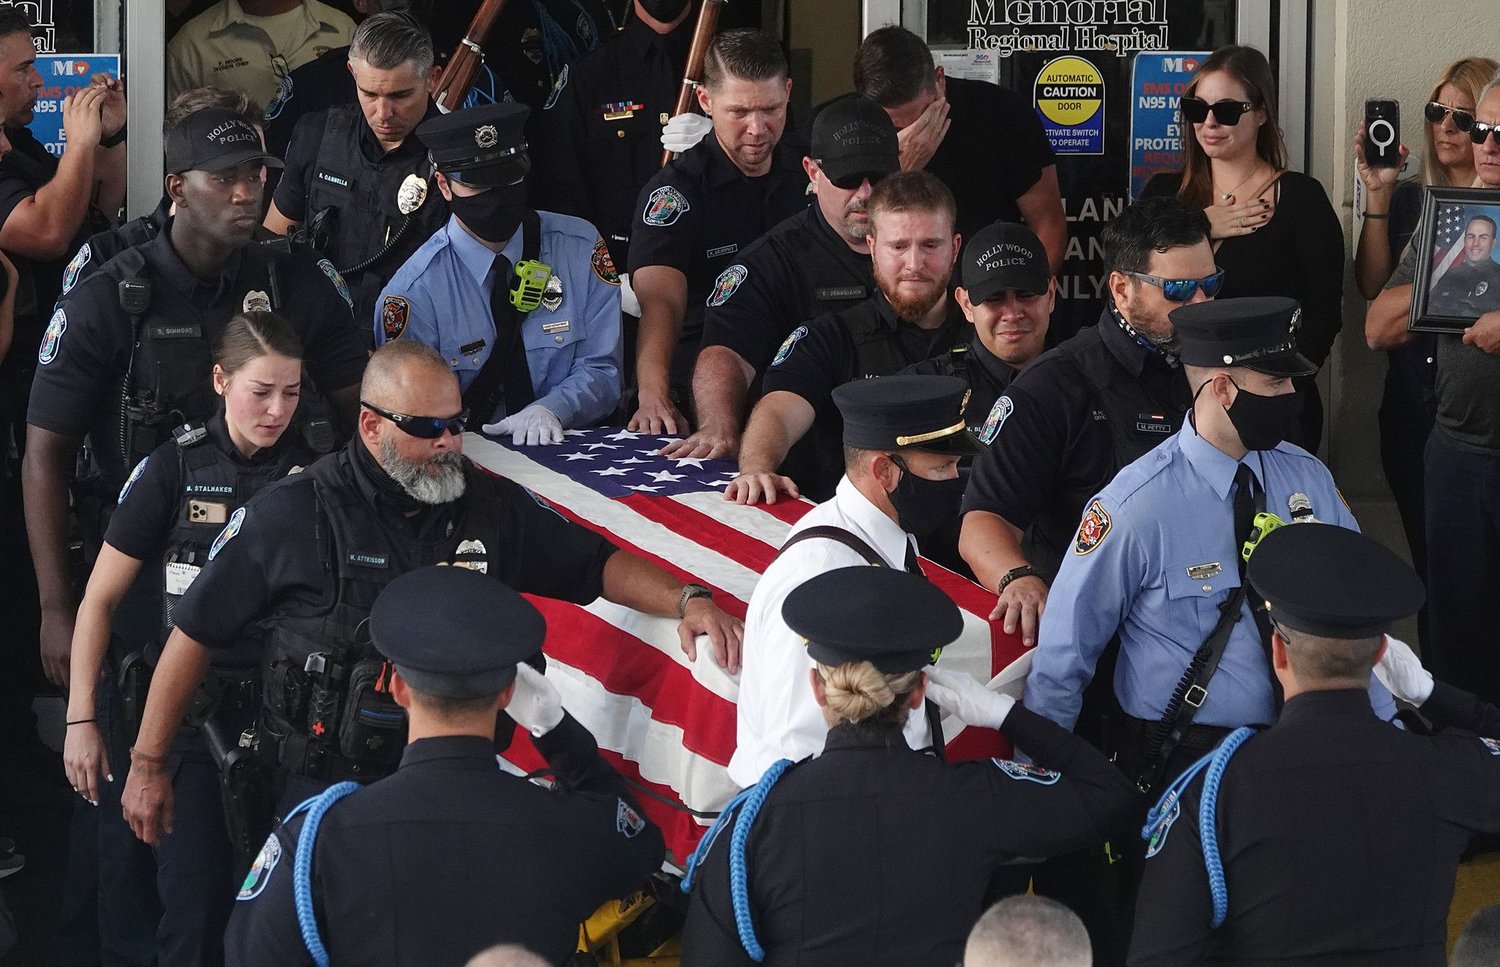 The transfer of the remains of slain Hollywood Police Officer Yandy Chirino takes place at Memorial Regional Hospital in Hollywood, Florida, on Monday, Oct. 18, 2021. Chirino was killed during a late-night altercation with a teenage suspect and died at the hospital. (Joe Cavaretta/South Florida Sun Sentinel/TNS)